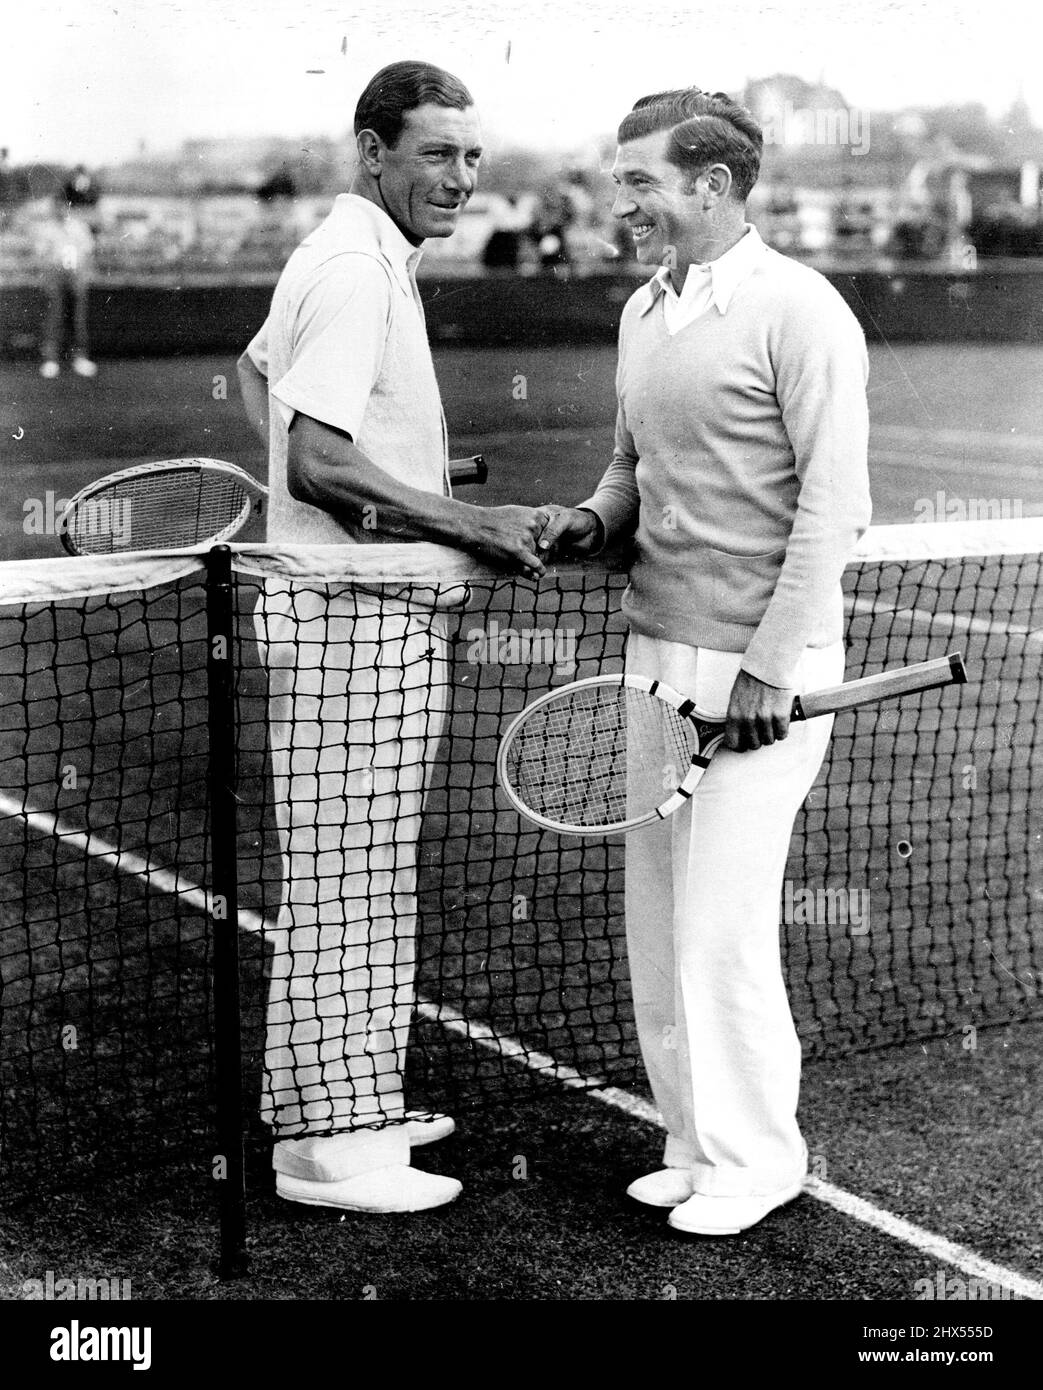 Vintage tennis match Black and White Stock Photos & Images - Alamy